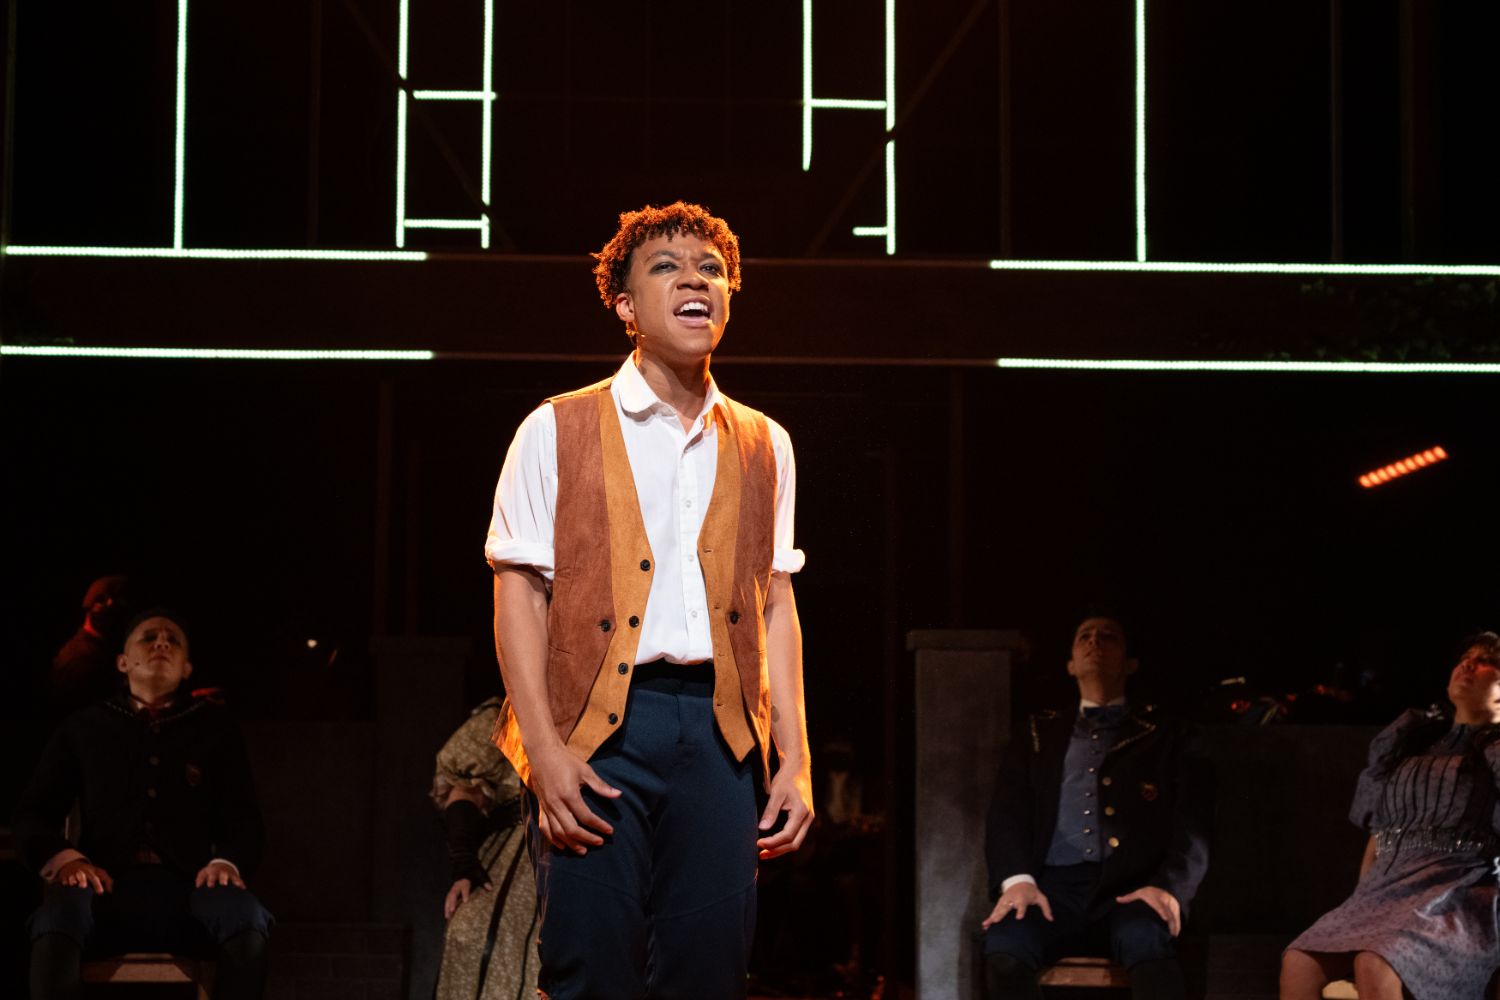 PHOTO: Jenny Graham | The South Pasadenan | Marcus Phillips as Moritz Stiefel performs “Don’t Do Sadness” in Spring Awakening at East West Players.